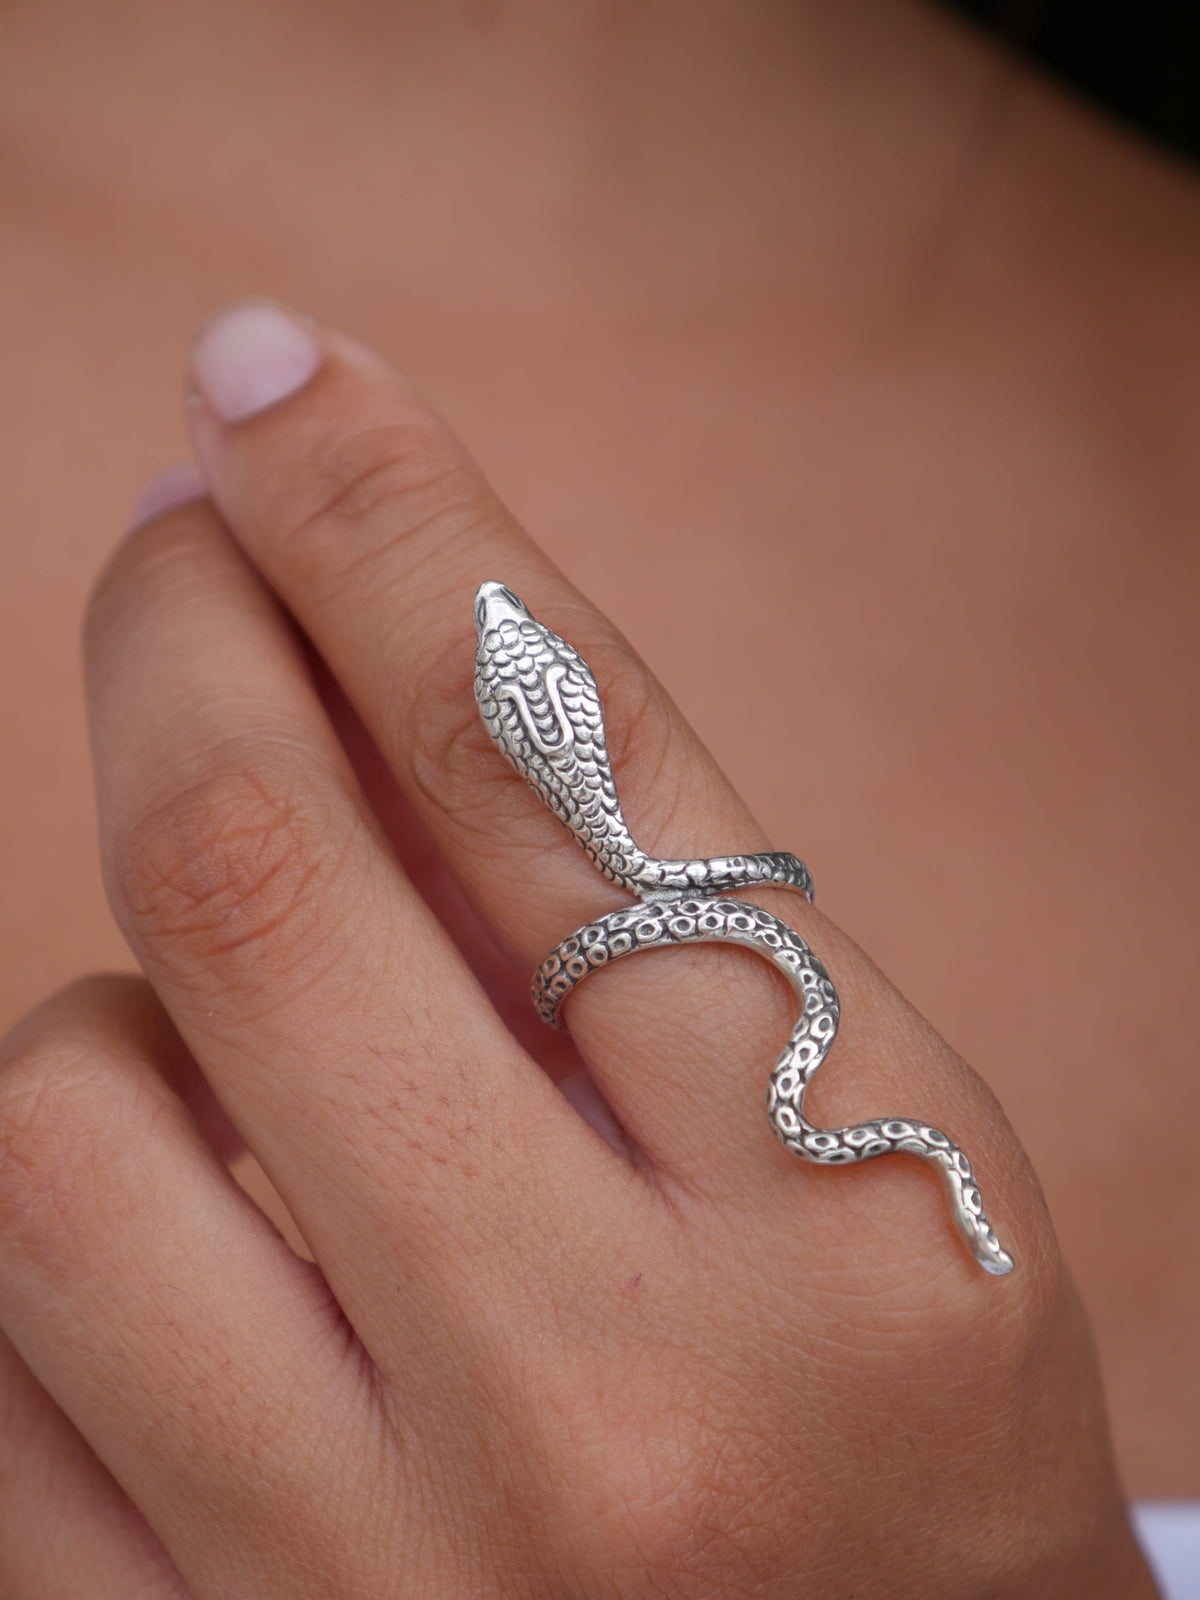 rings, silver rings, snake rings, statement rings, 925 sterling silver rings, statement rings, cool rings, unique rigs, rings for men and woman, cool rings, trending jewelry on tiktok and instagram, fashion jewelry, accessories, shopping in Miami, shopping in brickell, jewelry, gift ideas, casual rings, fine jewelry, popular rings, rings that dont turn green with water, nice jewelry, rings for the index finger, snake jewelry, snake ring, snake accessories, jewelry store in brickell, Miami, influencer brands